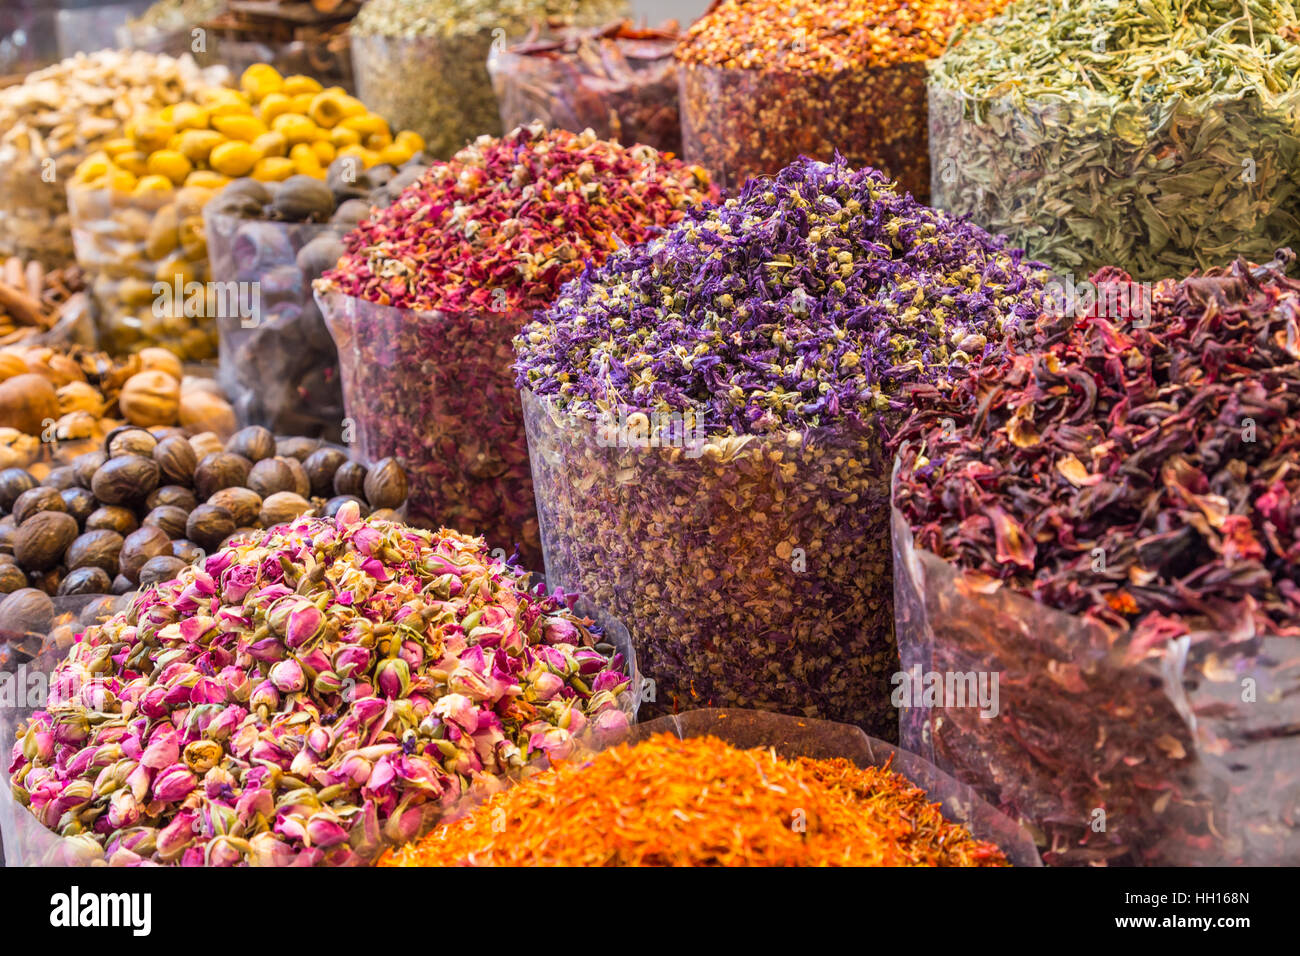 Spices and herbs being sold on Morocco traditional market. Stock Photo